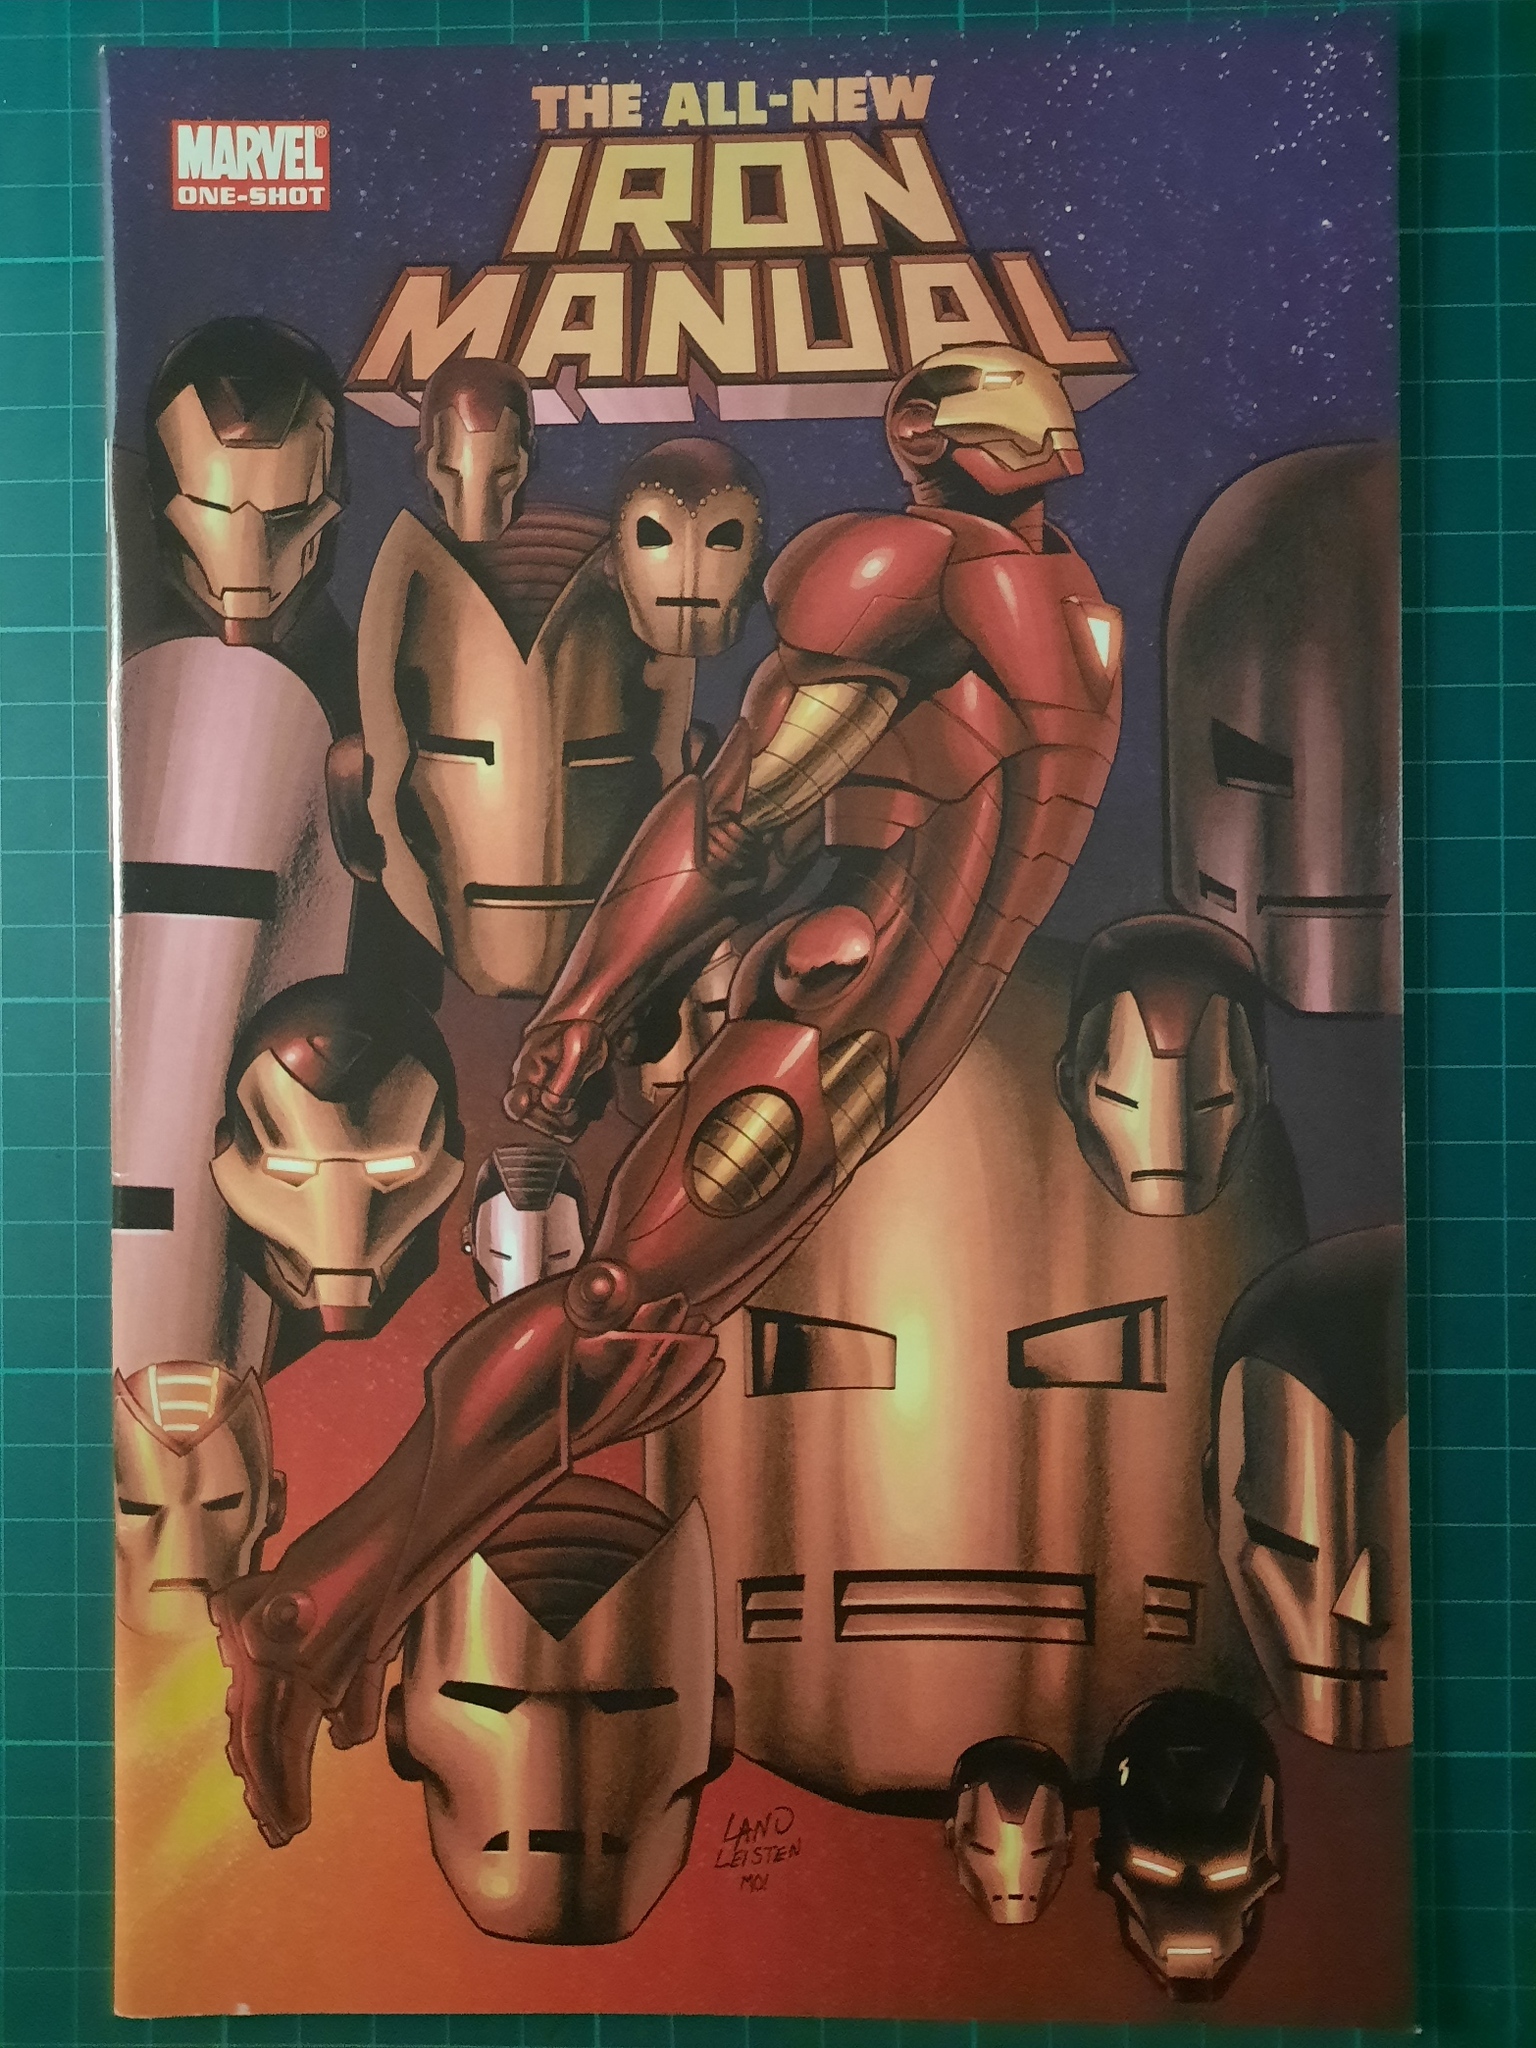 The all-new iron manual (one shot)